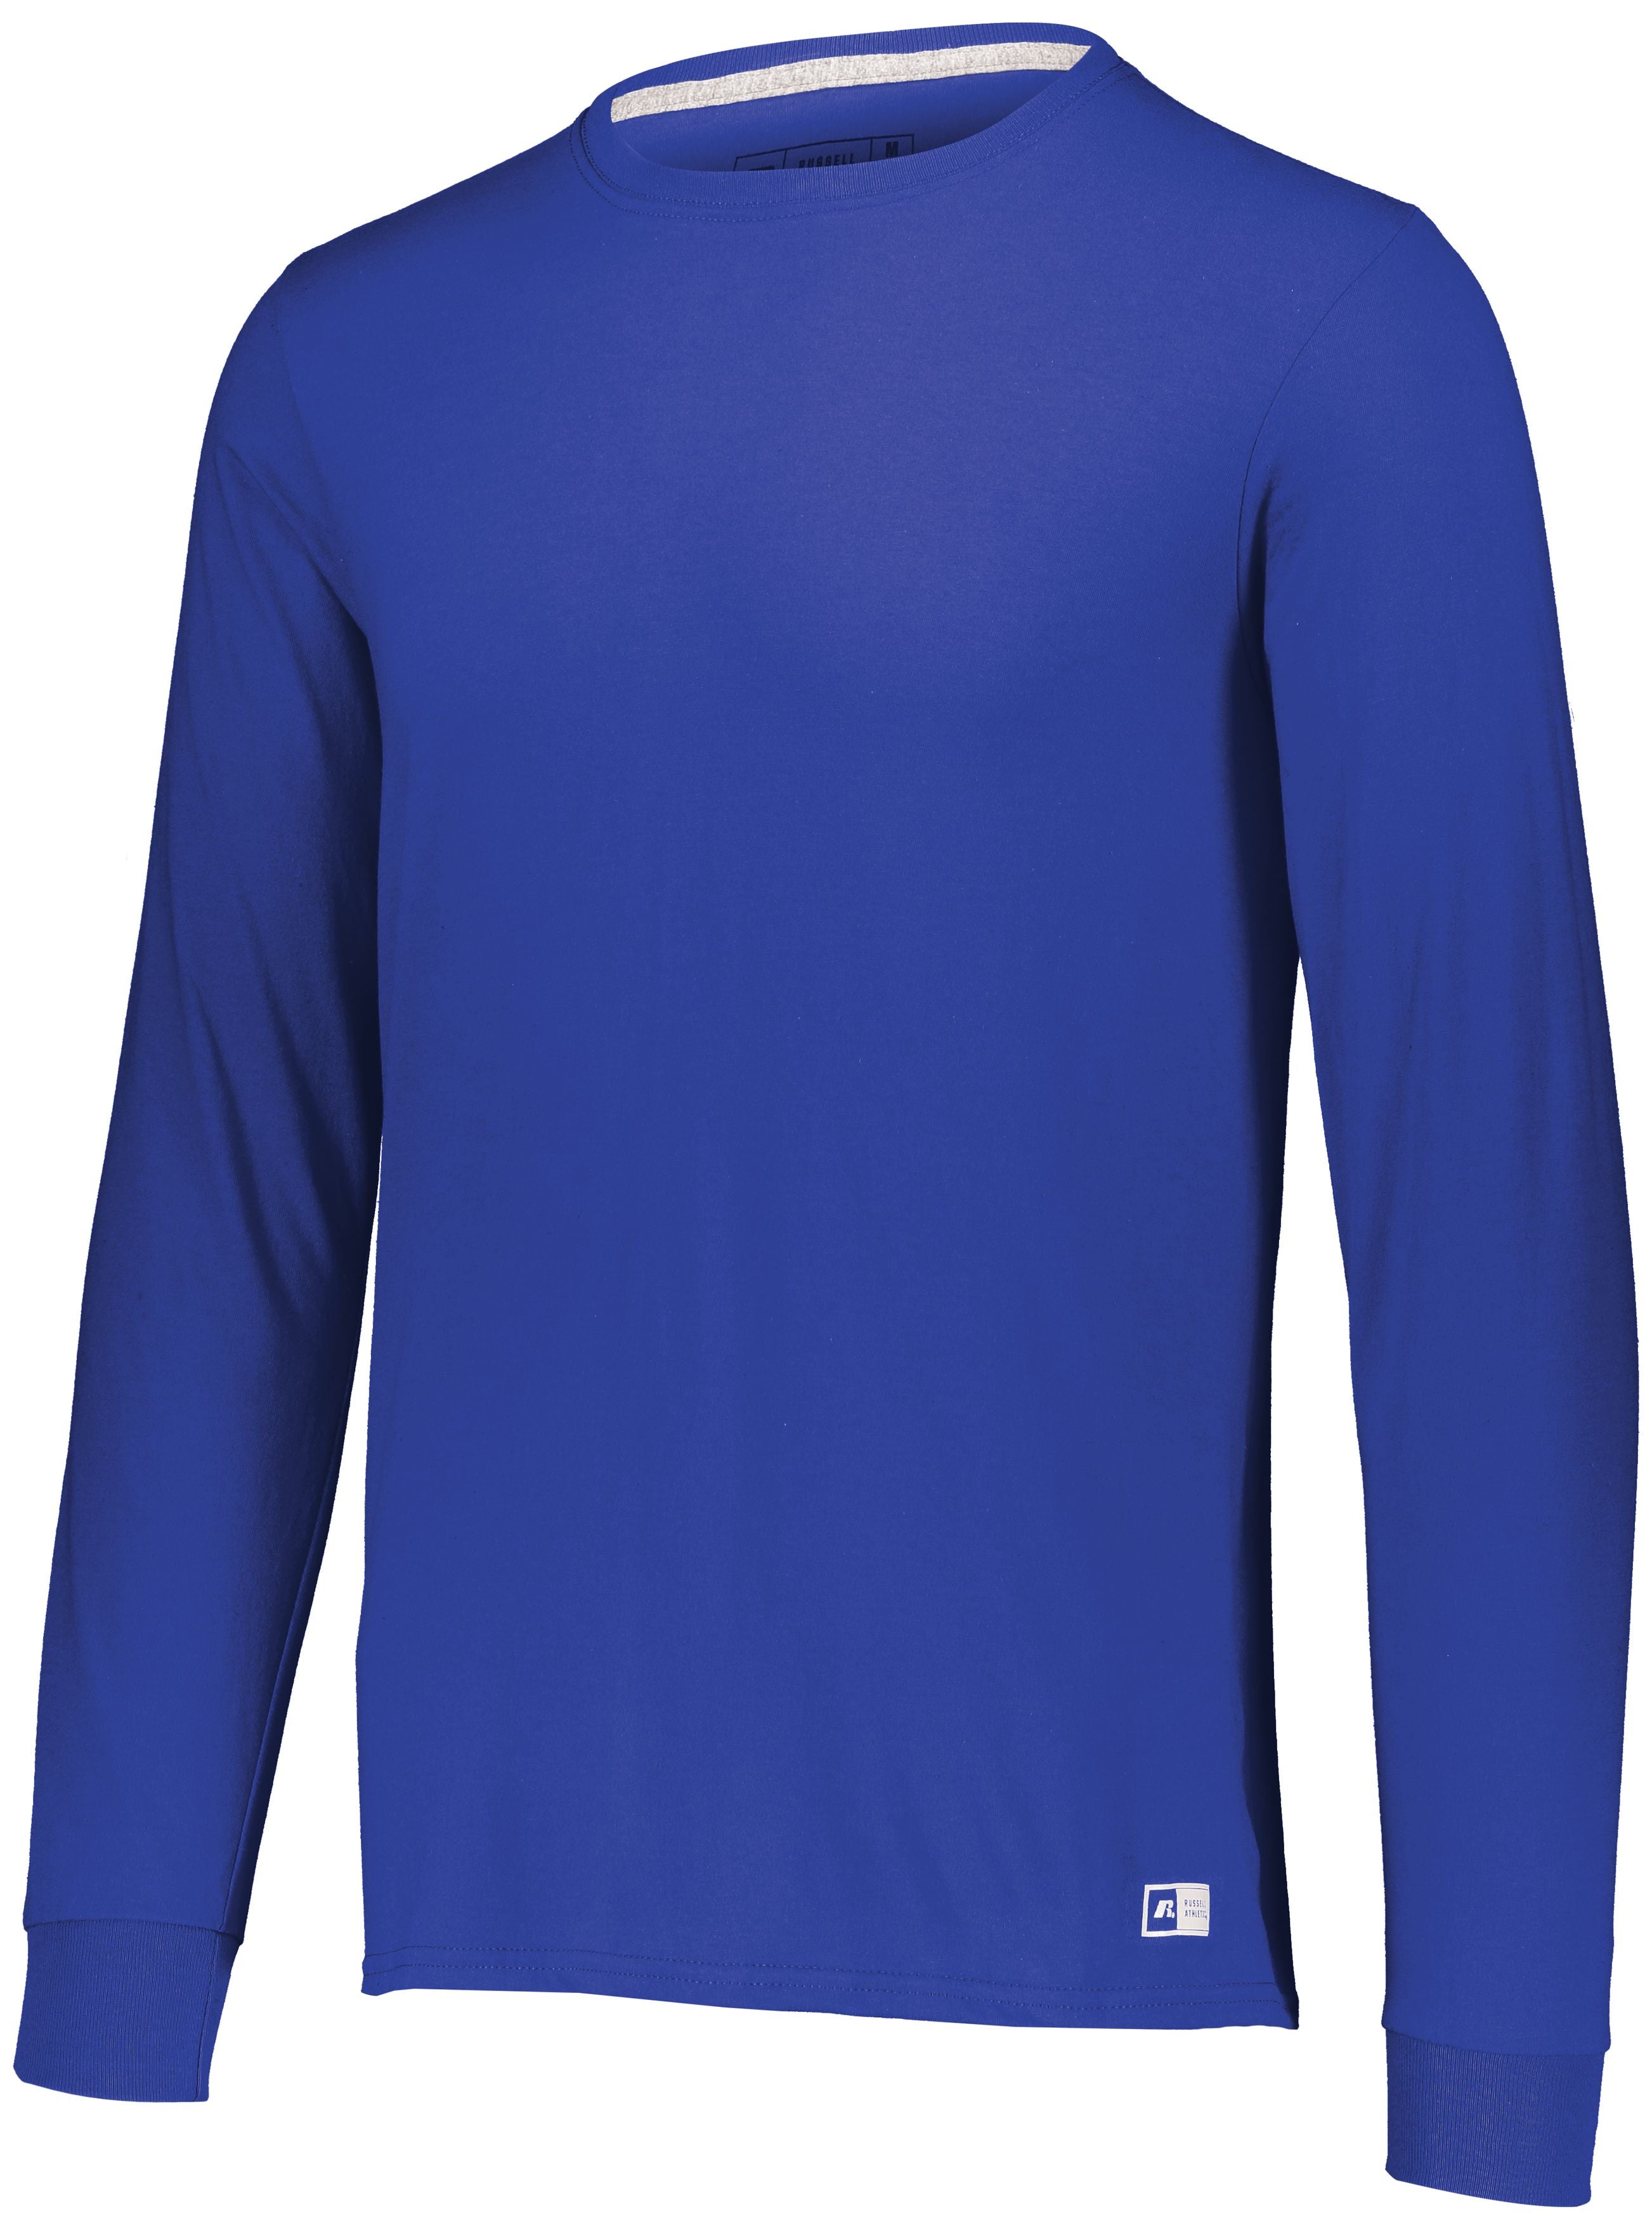 Russell Athletic Essential Long Sleeve Tee in Royal  -Part of the Adult, Adult-Tee-Shirt, T-Shirts, Russell-Athletic-Products, Shirts product lines at KanaleyCreations.com